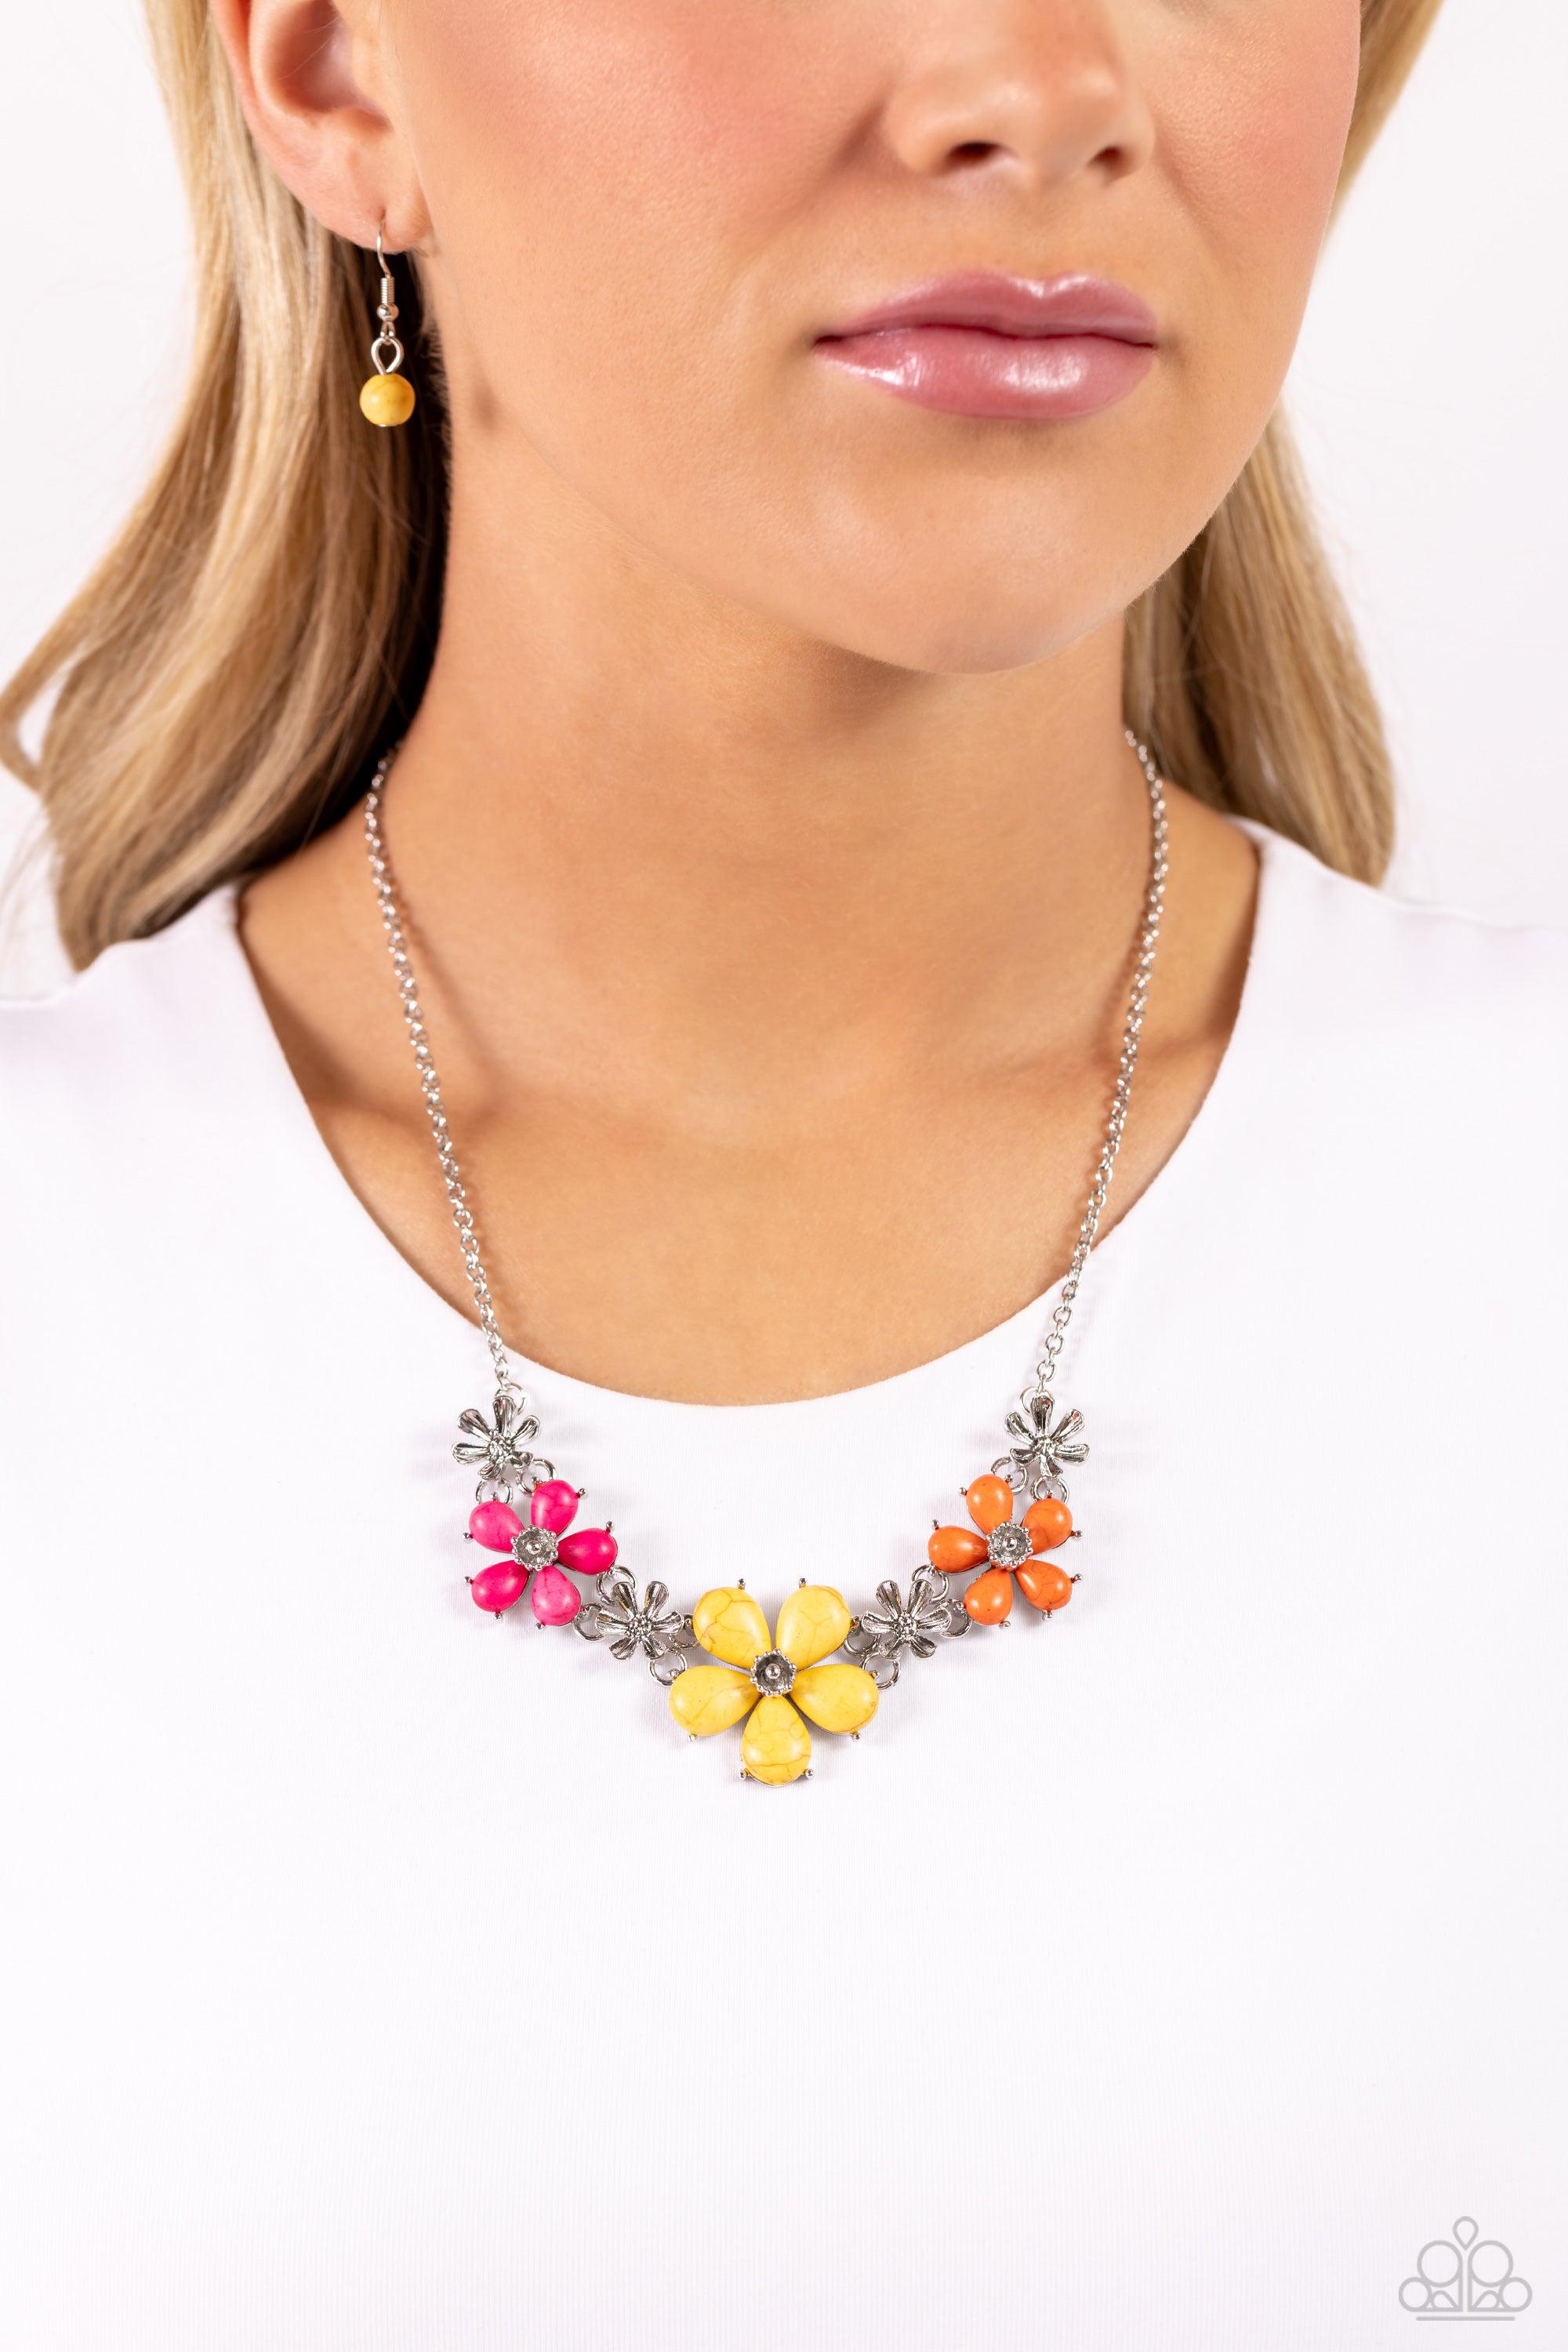 Growing Garland Yellow & Multi Stone Flower Necklace - Paparazzi Accessories- lightbox - CarasShop.com - $5 Jewelry by Cara Jewels